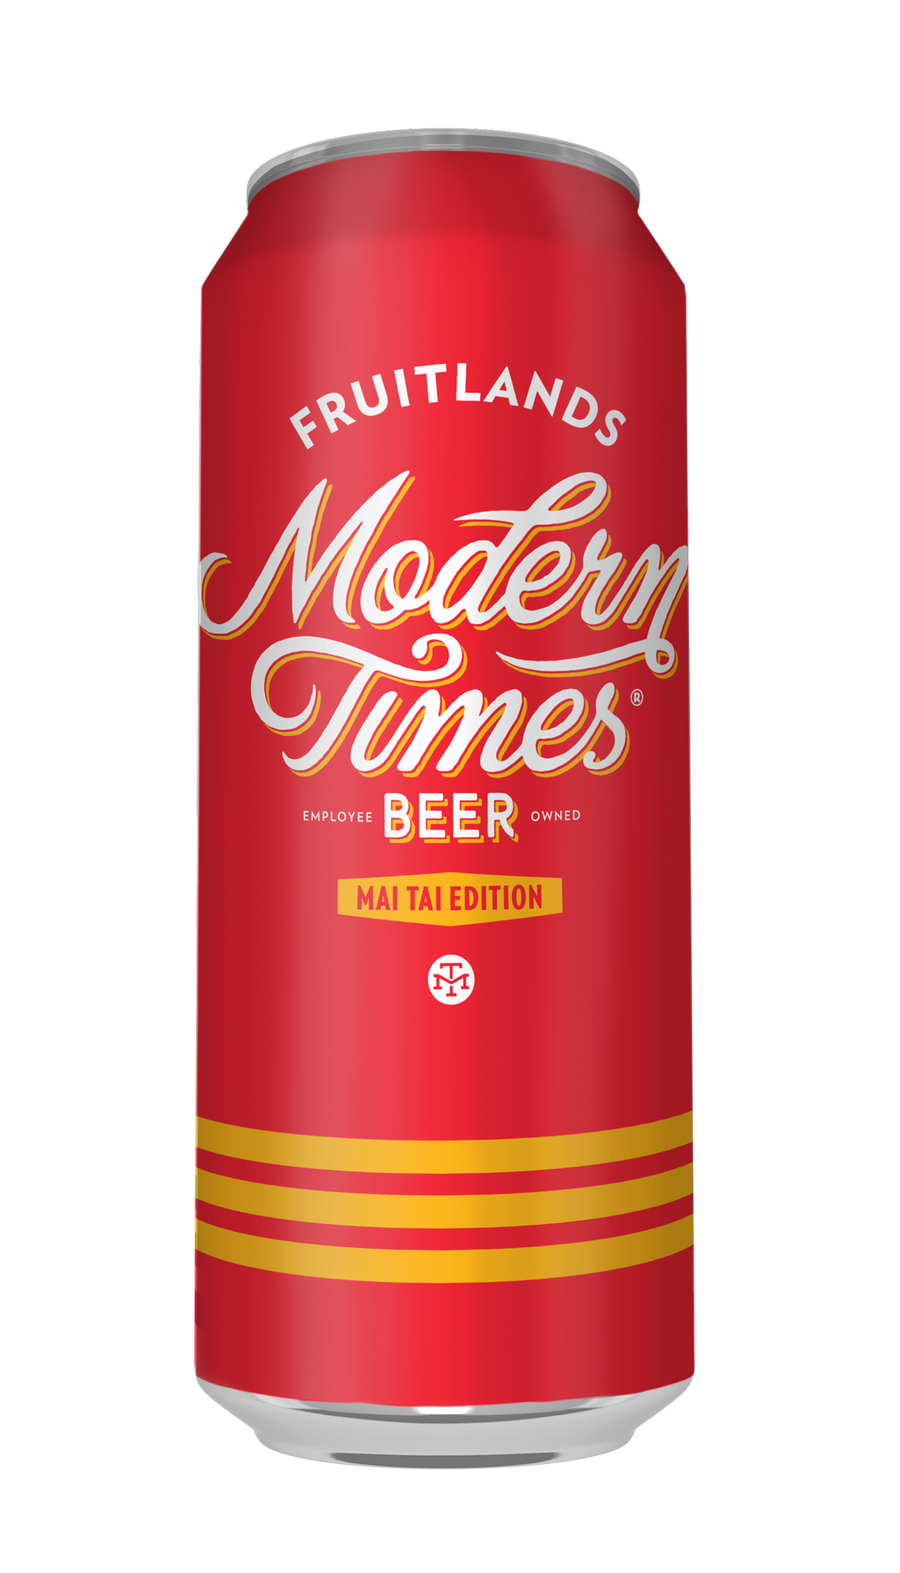 Buy Modern Times Fruitlands May Tai Edition Online -Craft City